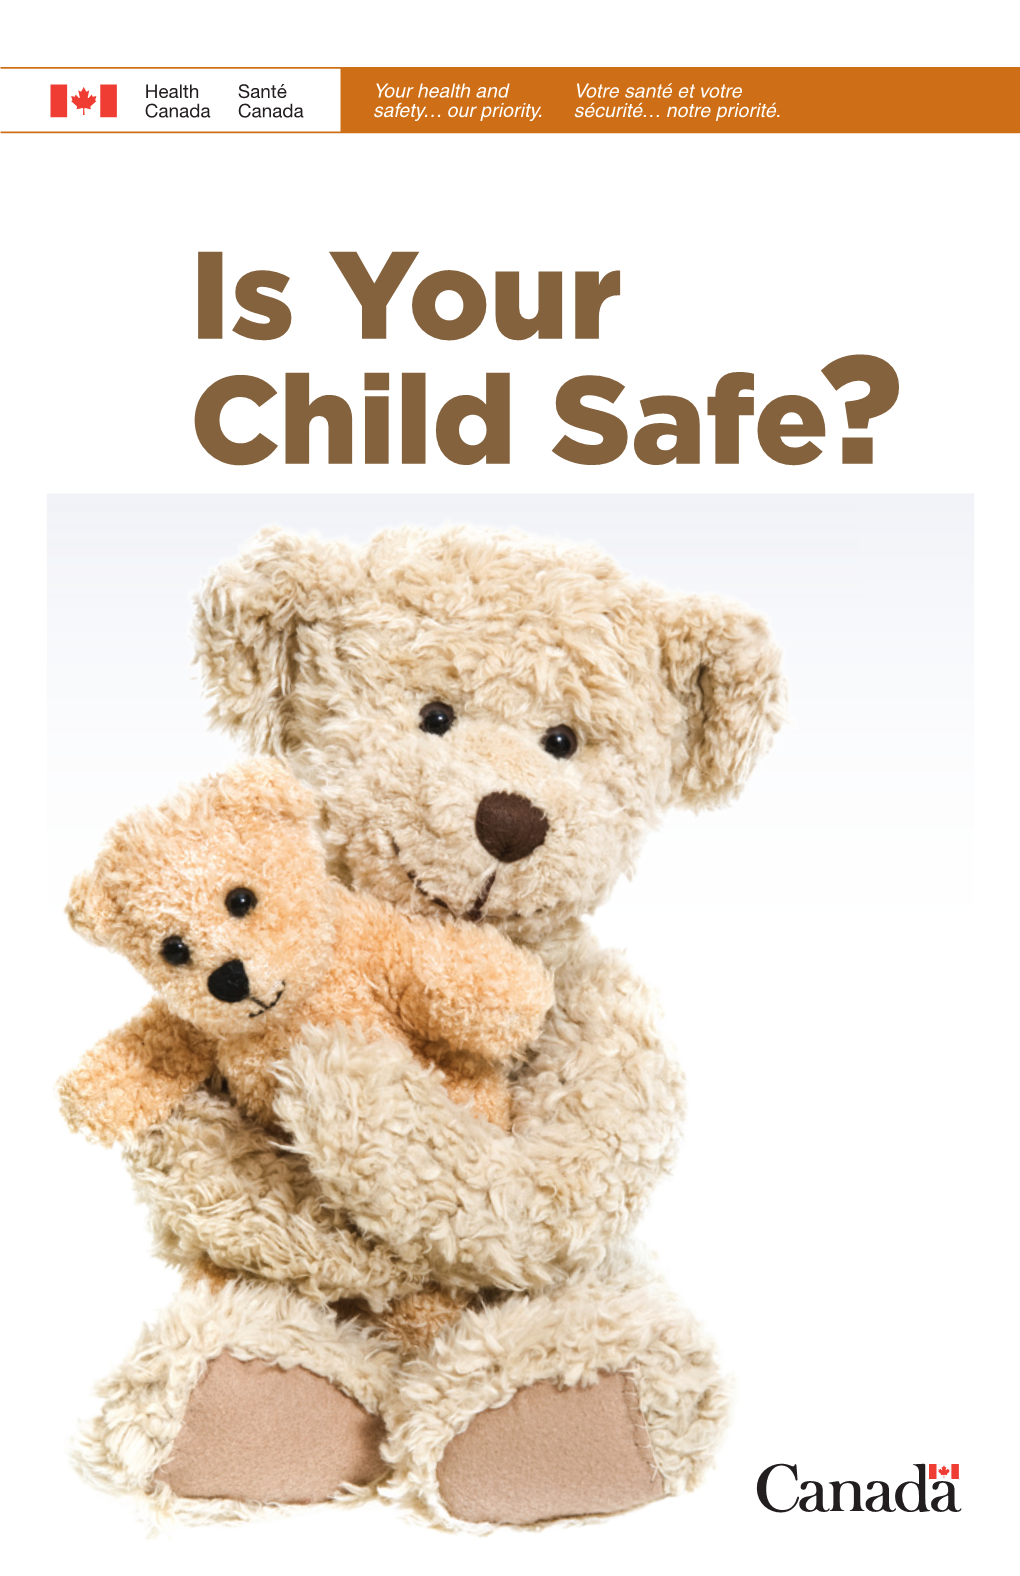 Is Your Child Safe? Health Canada Is the Federal Department Responsible for Helping the People of Canada Maintain and Improve Their Health